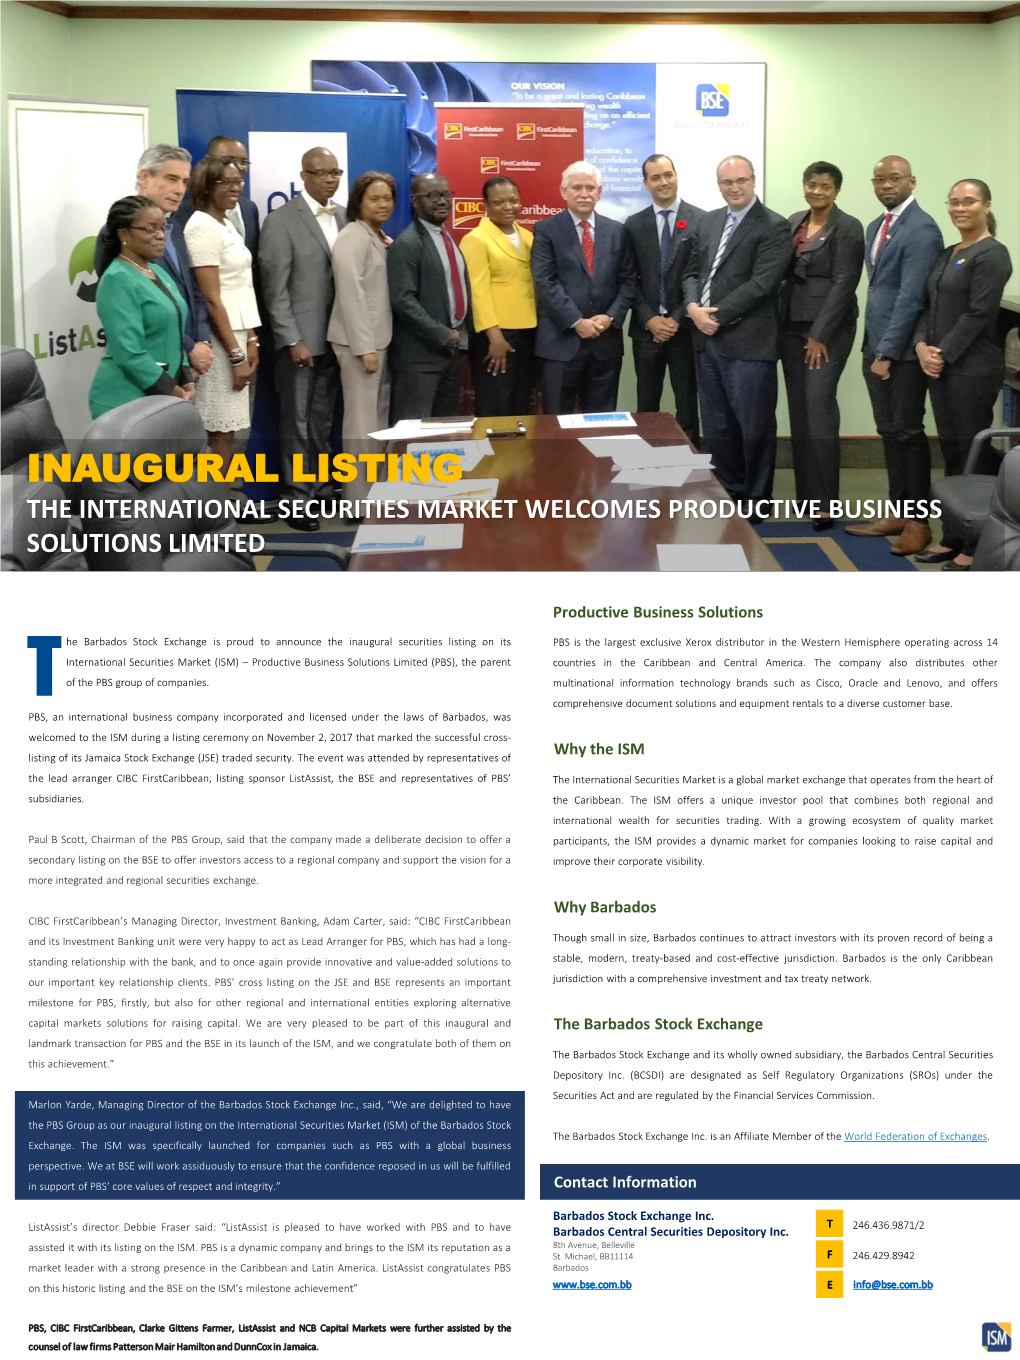 Inaugural Listing the International Securities Market Welcomes Productive Business Solutions Limited